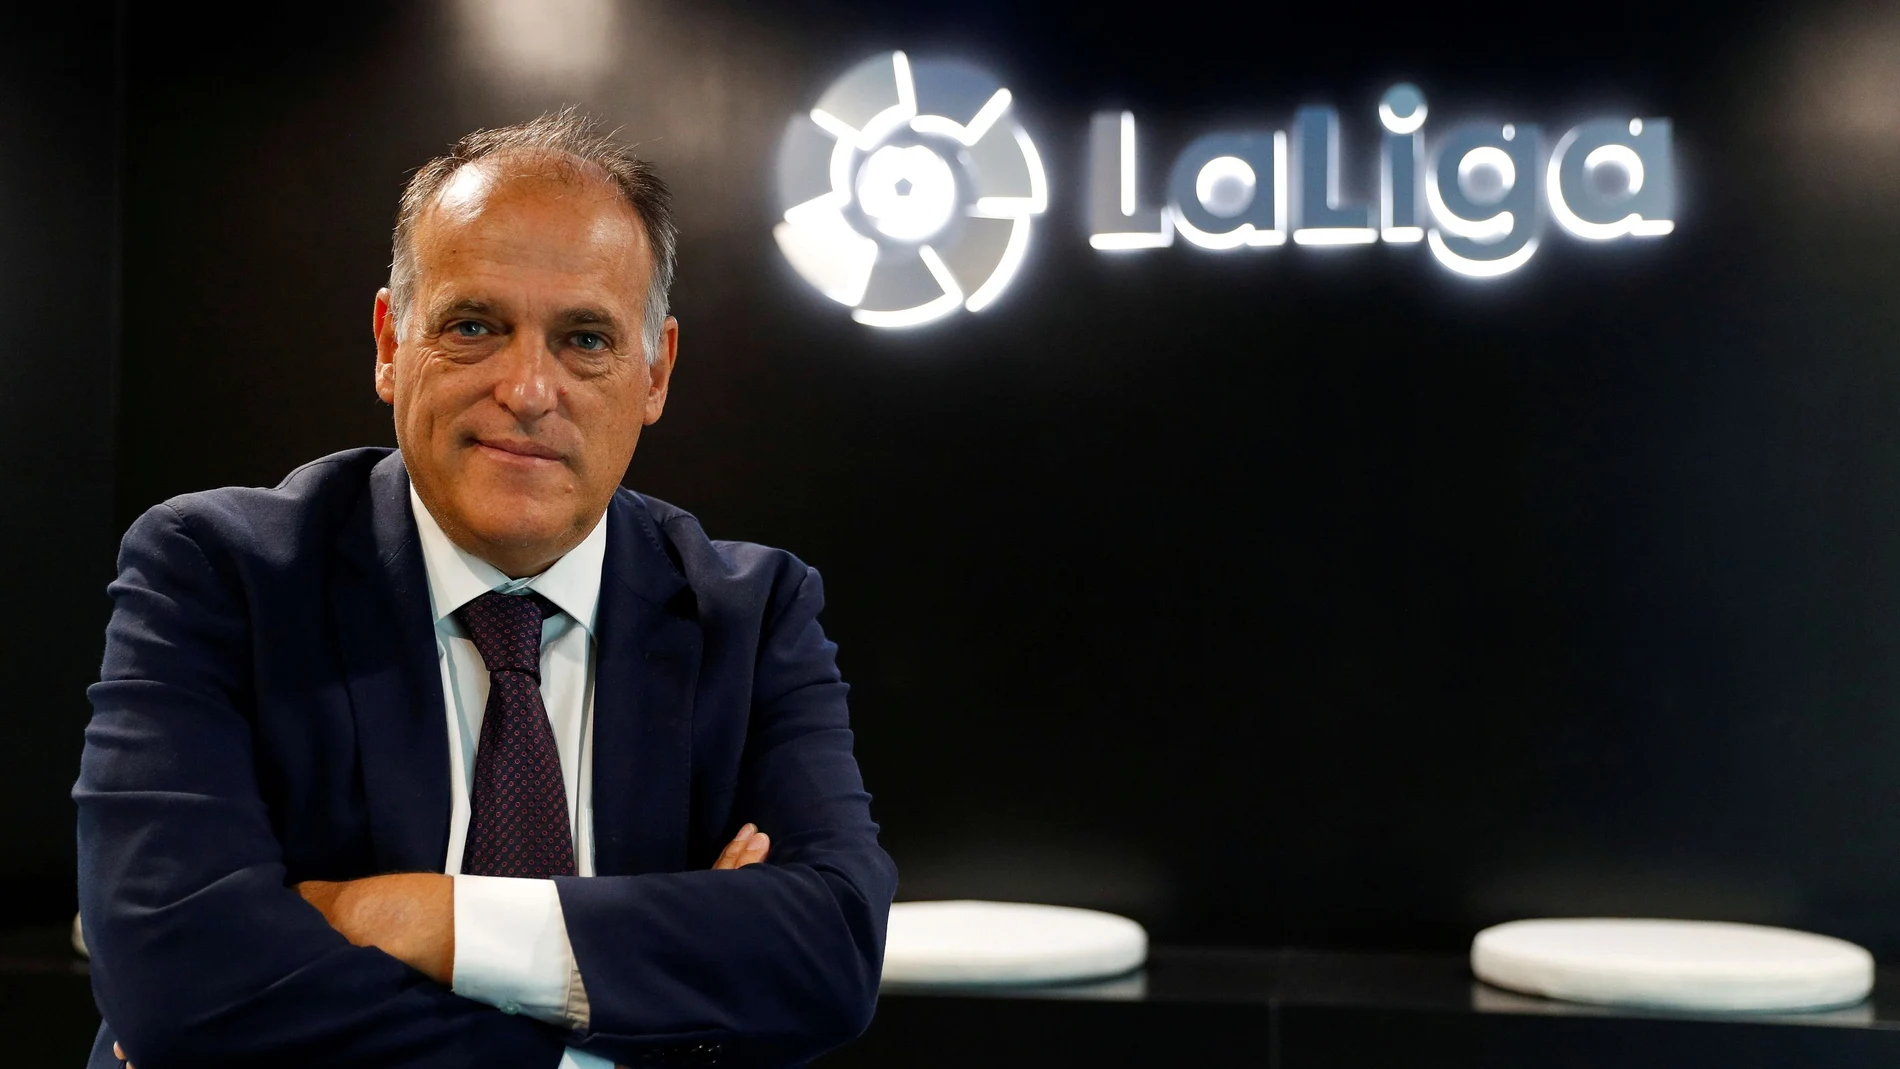 FILE PHOTO: La Liga President Javier Tebas poses during an interview with Reuters at the La Liga headquarters in Madrid